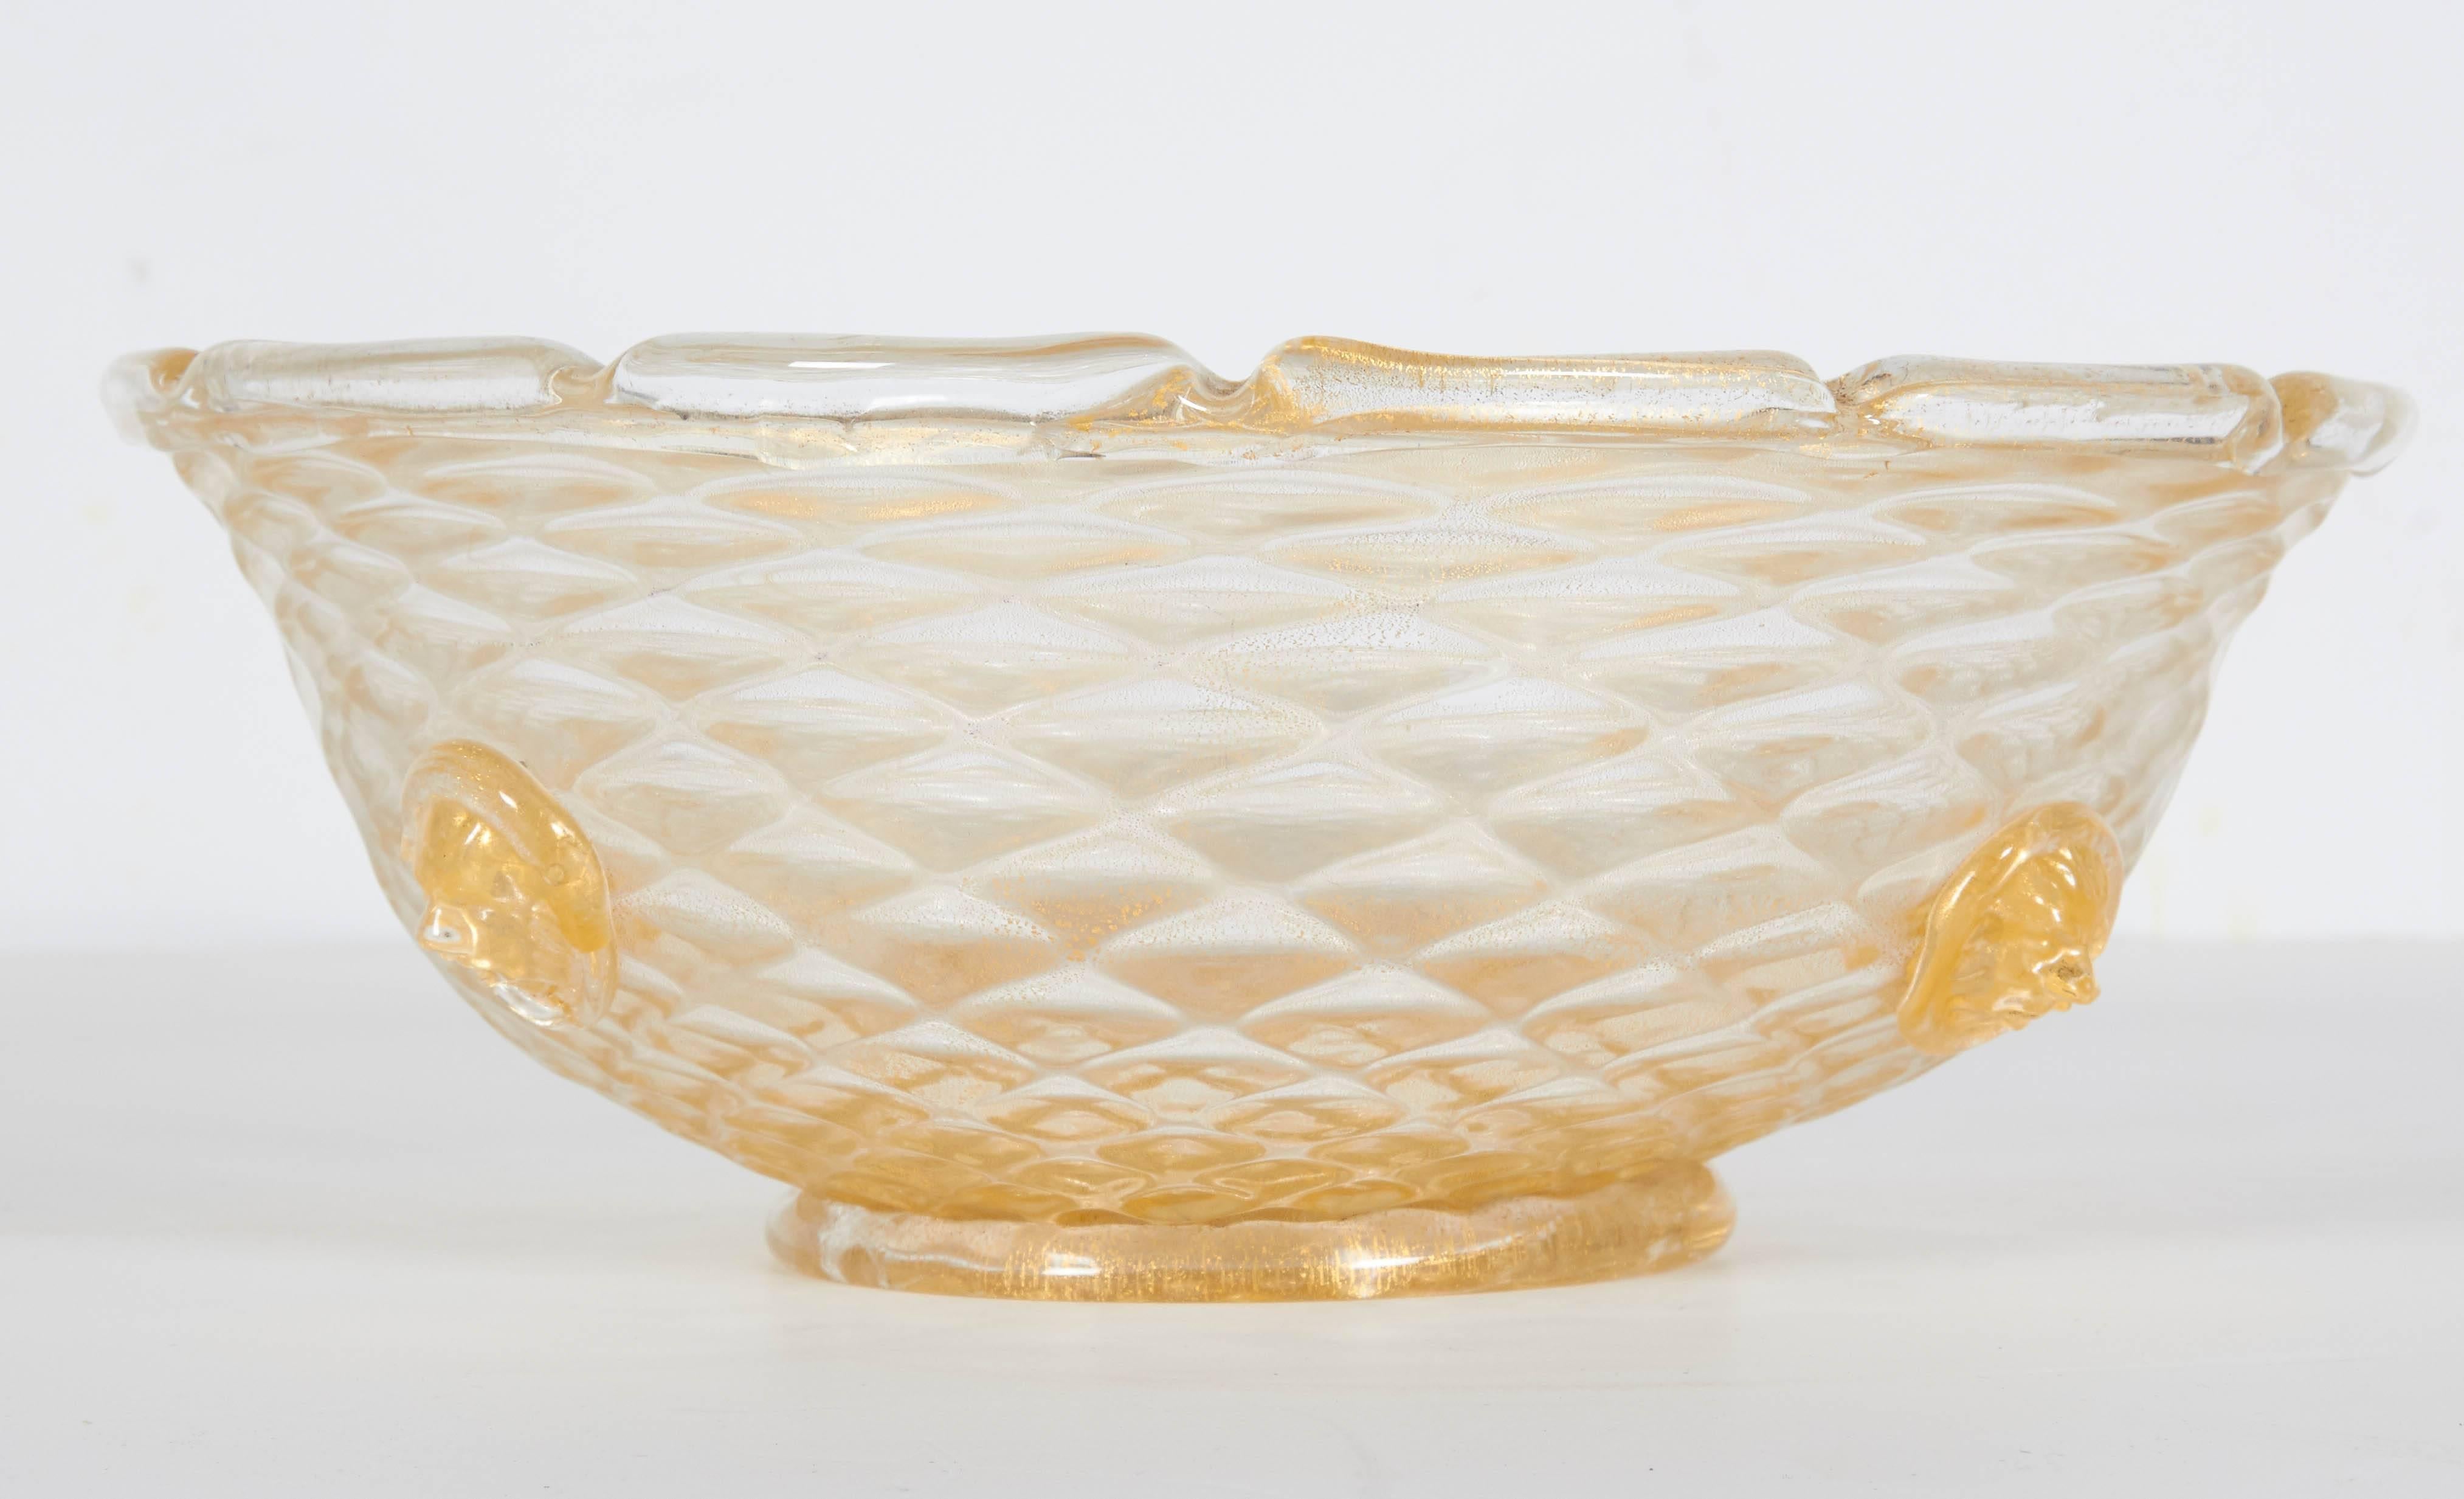 Art glass bowl with a lovely form, ornate detailing and swirls of gold dust inclusions worked into the glass. Quite nice! Please contact for location. 